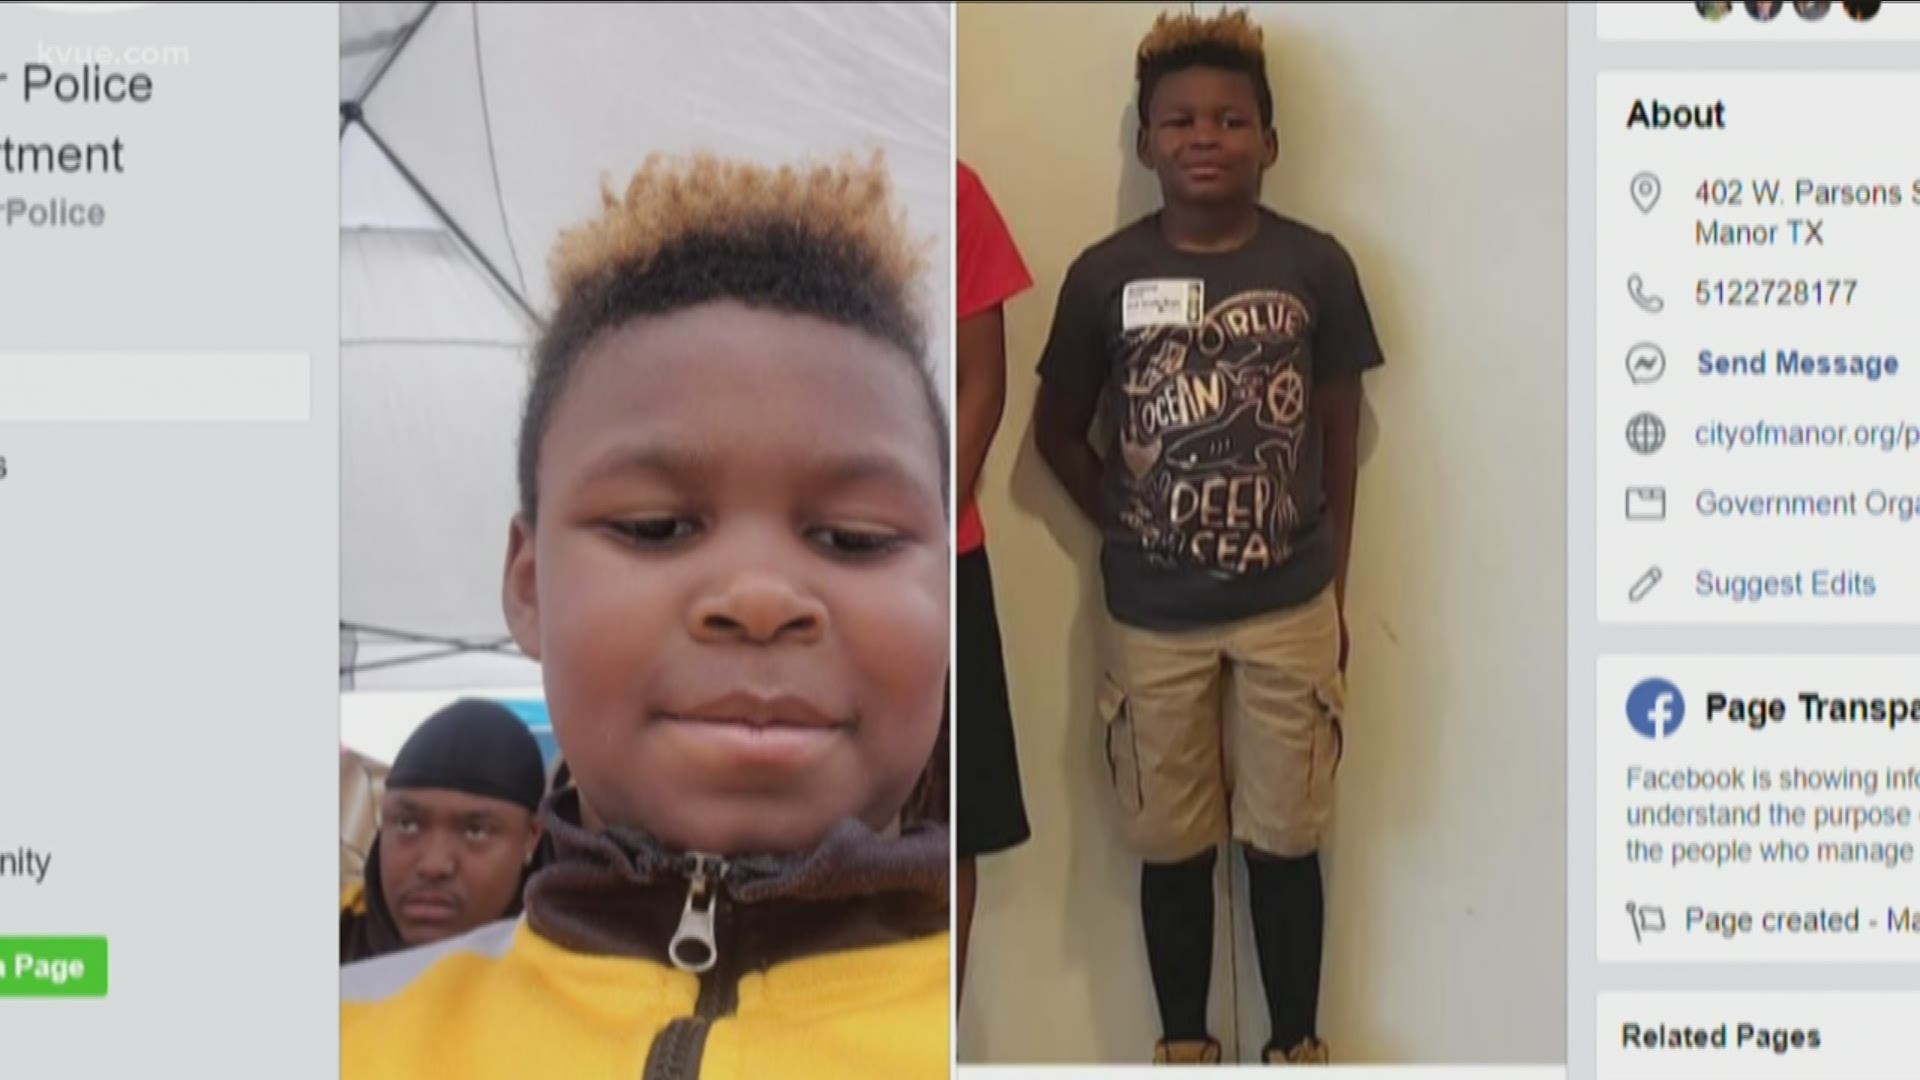 Police are searching for the 8-year-old.